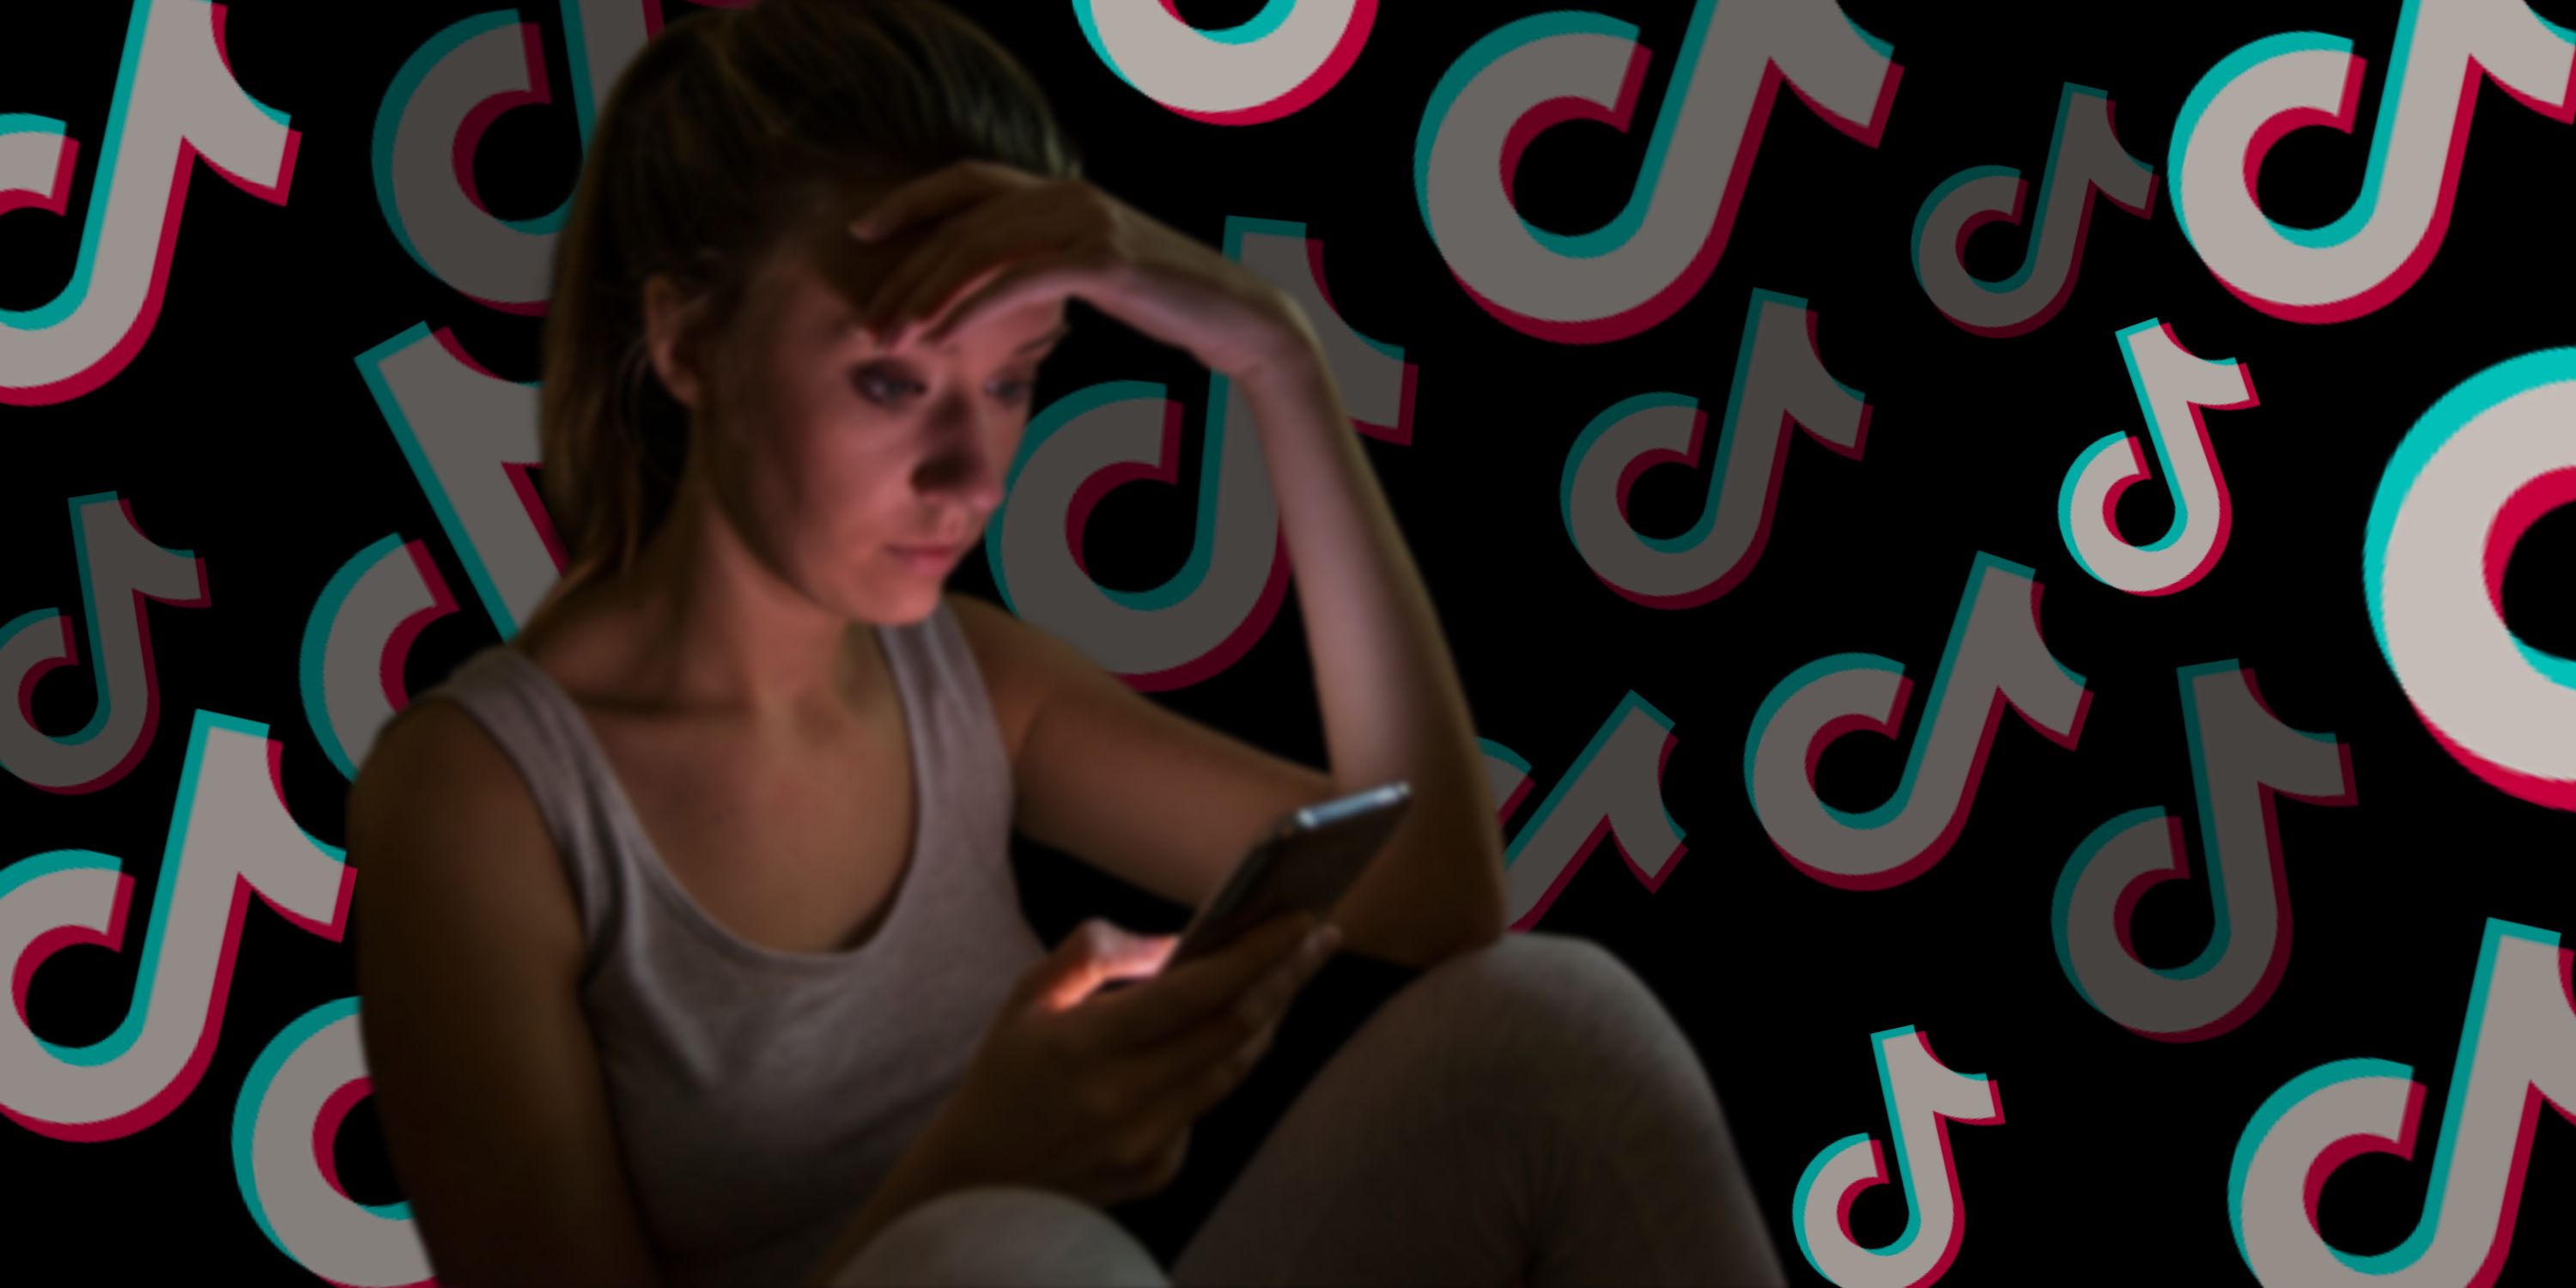 A stock image of a girl looking down at her phone is overlaid on a black background featuring repeating TikTok logos